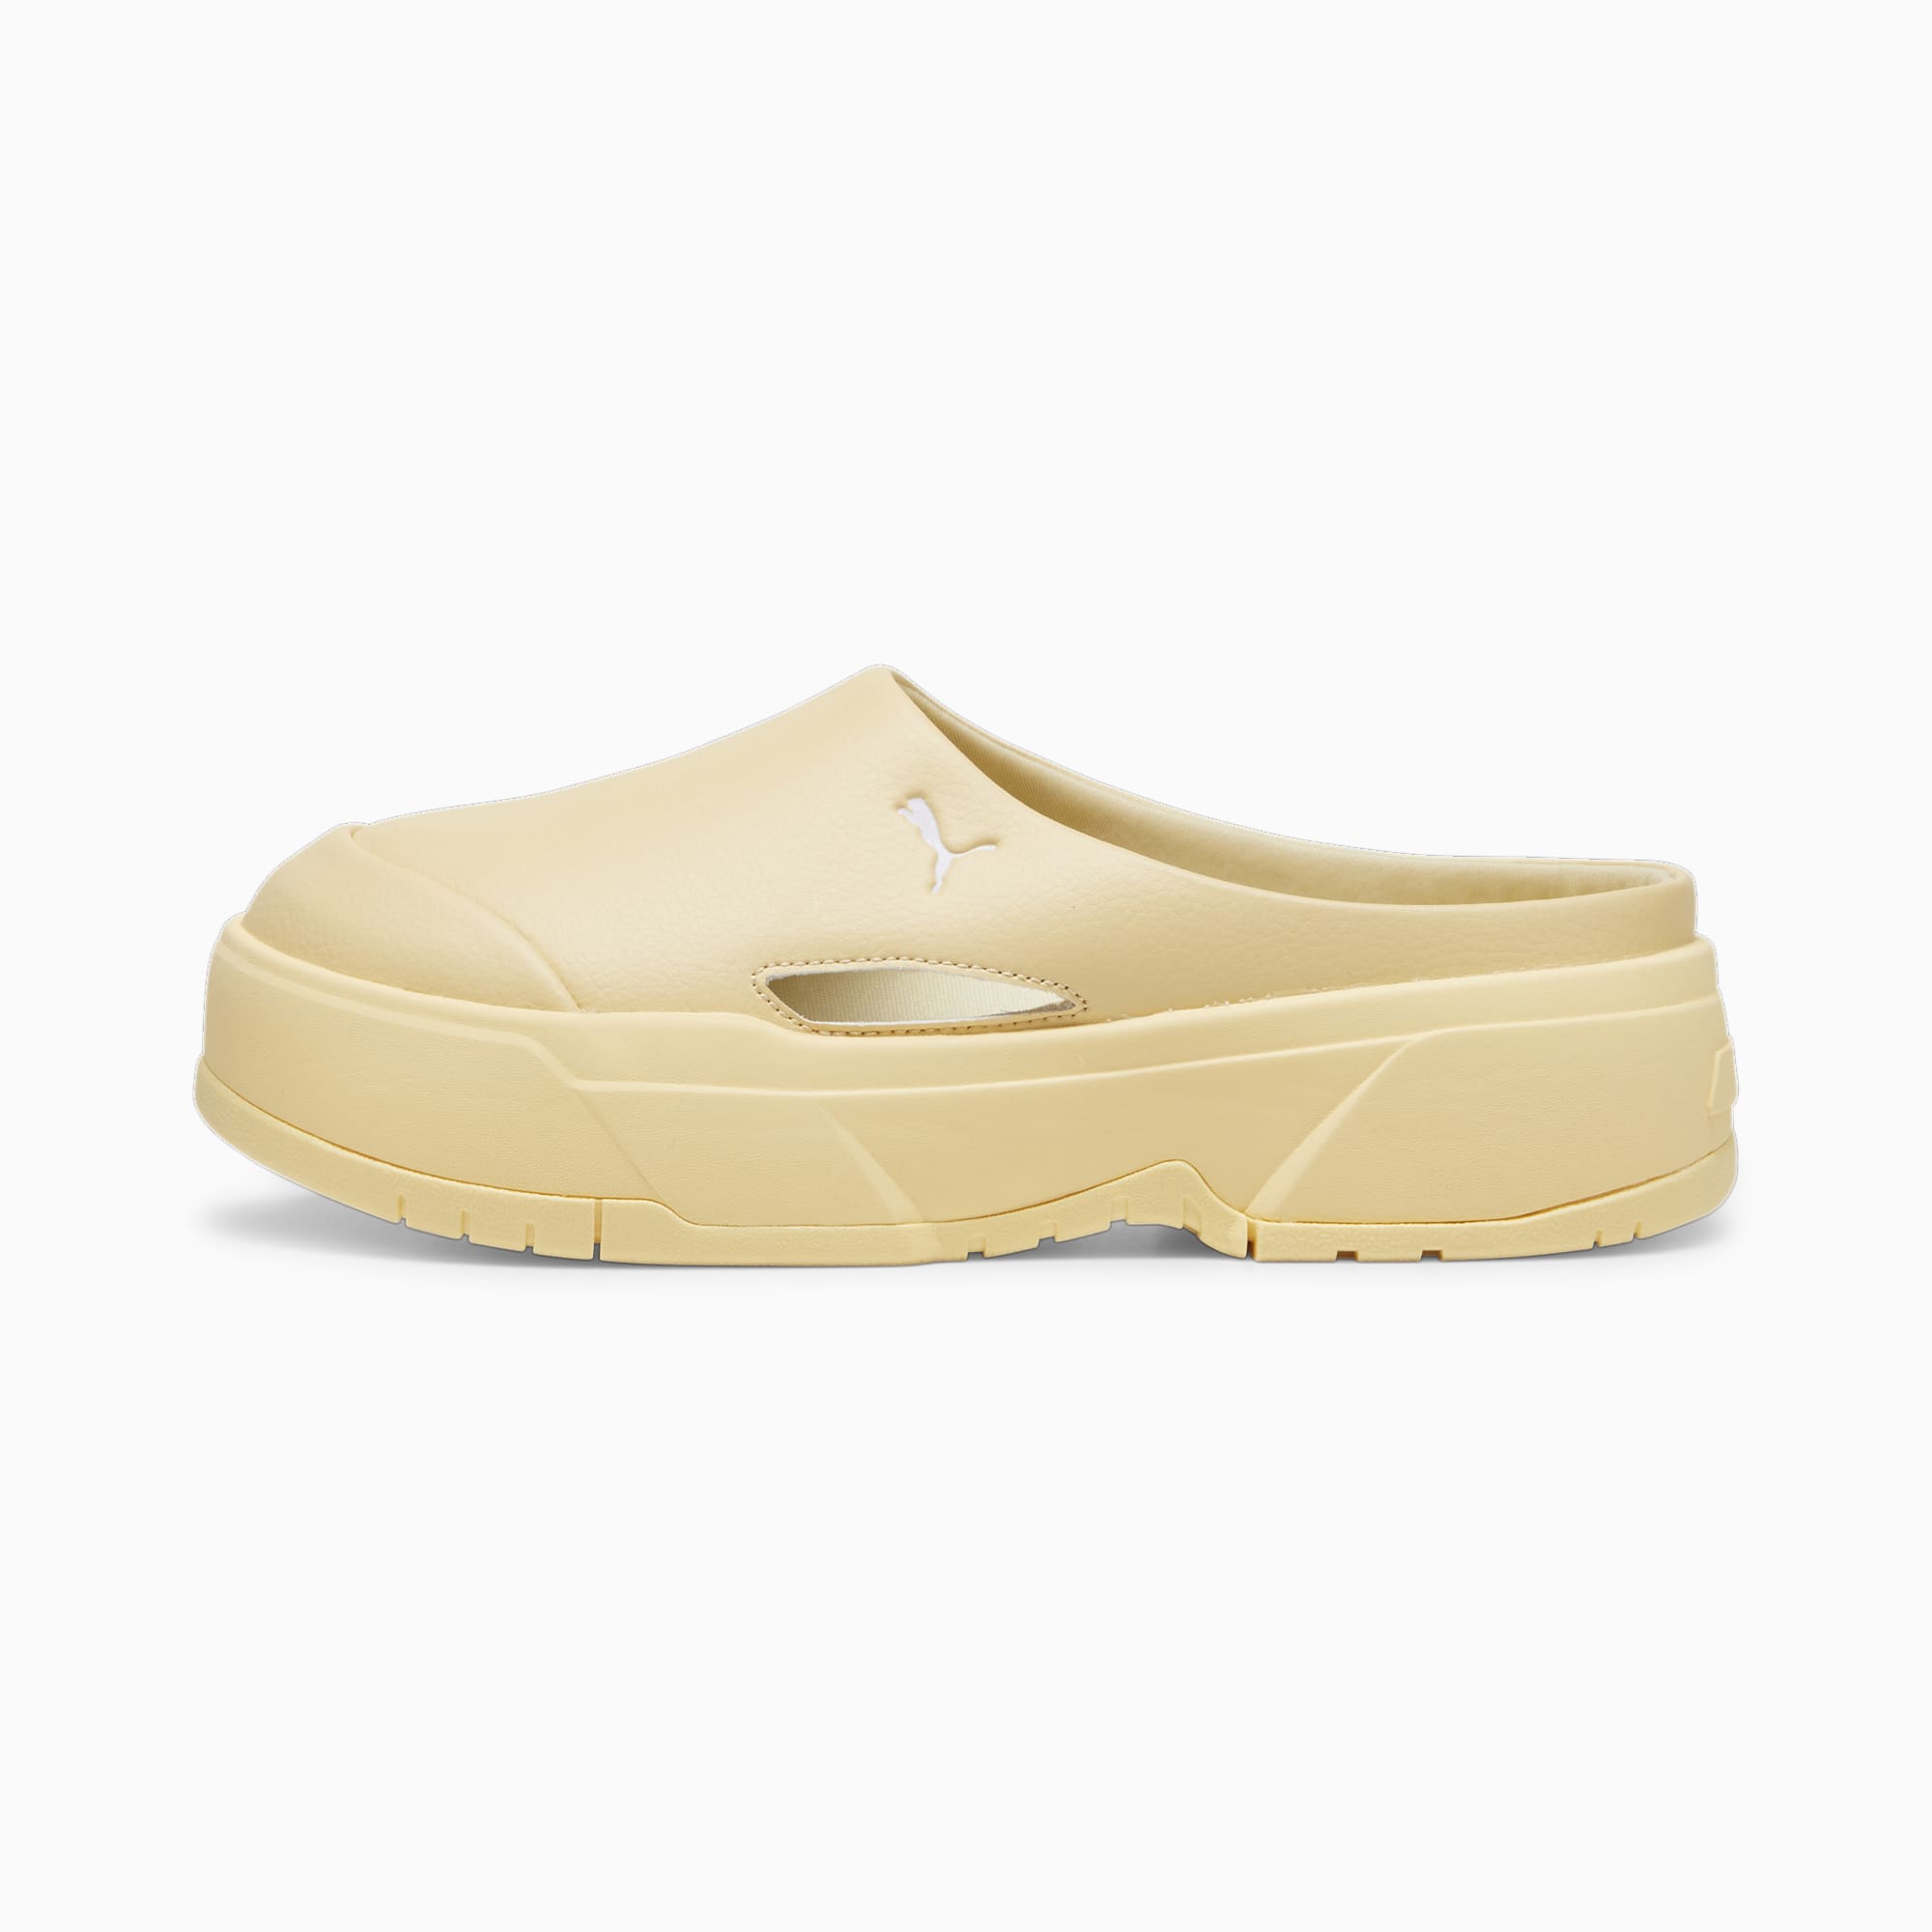 puma chaussure mules ca mule femme, taille 40.5, chaussures